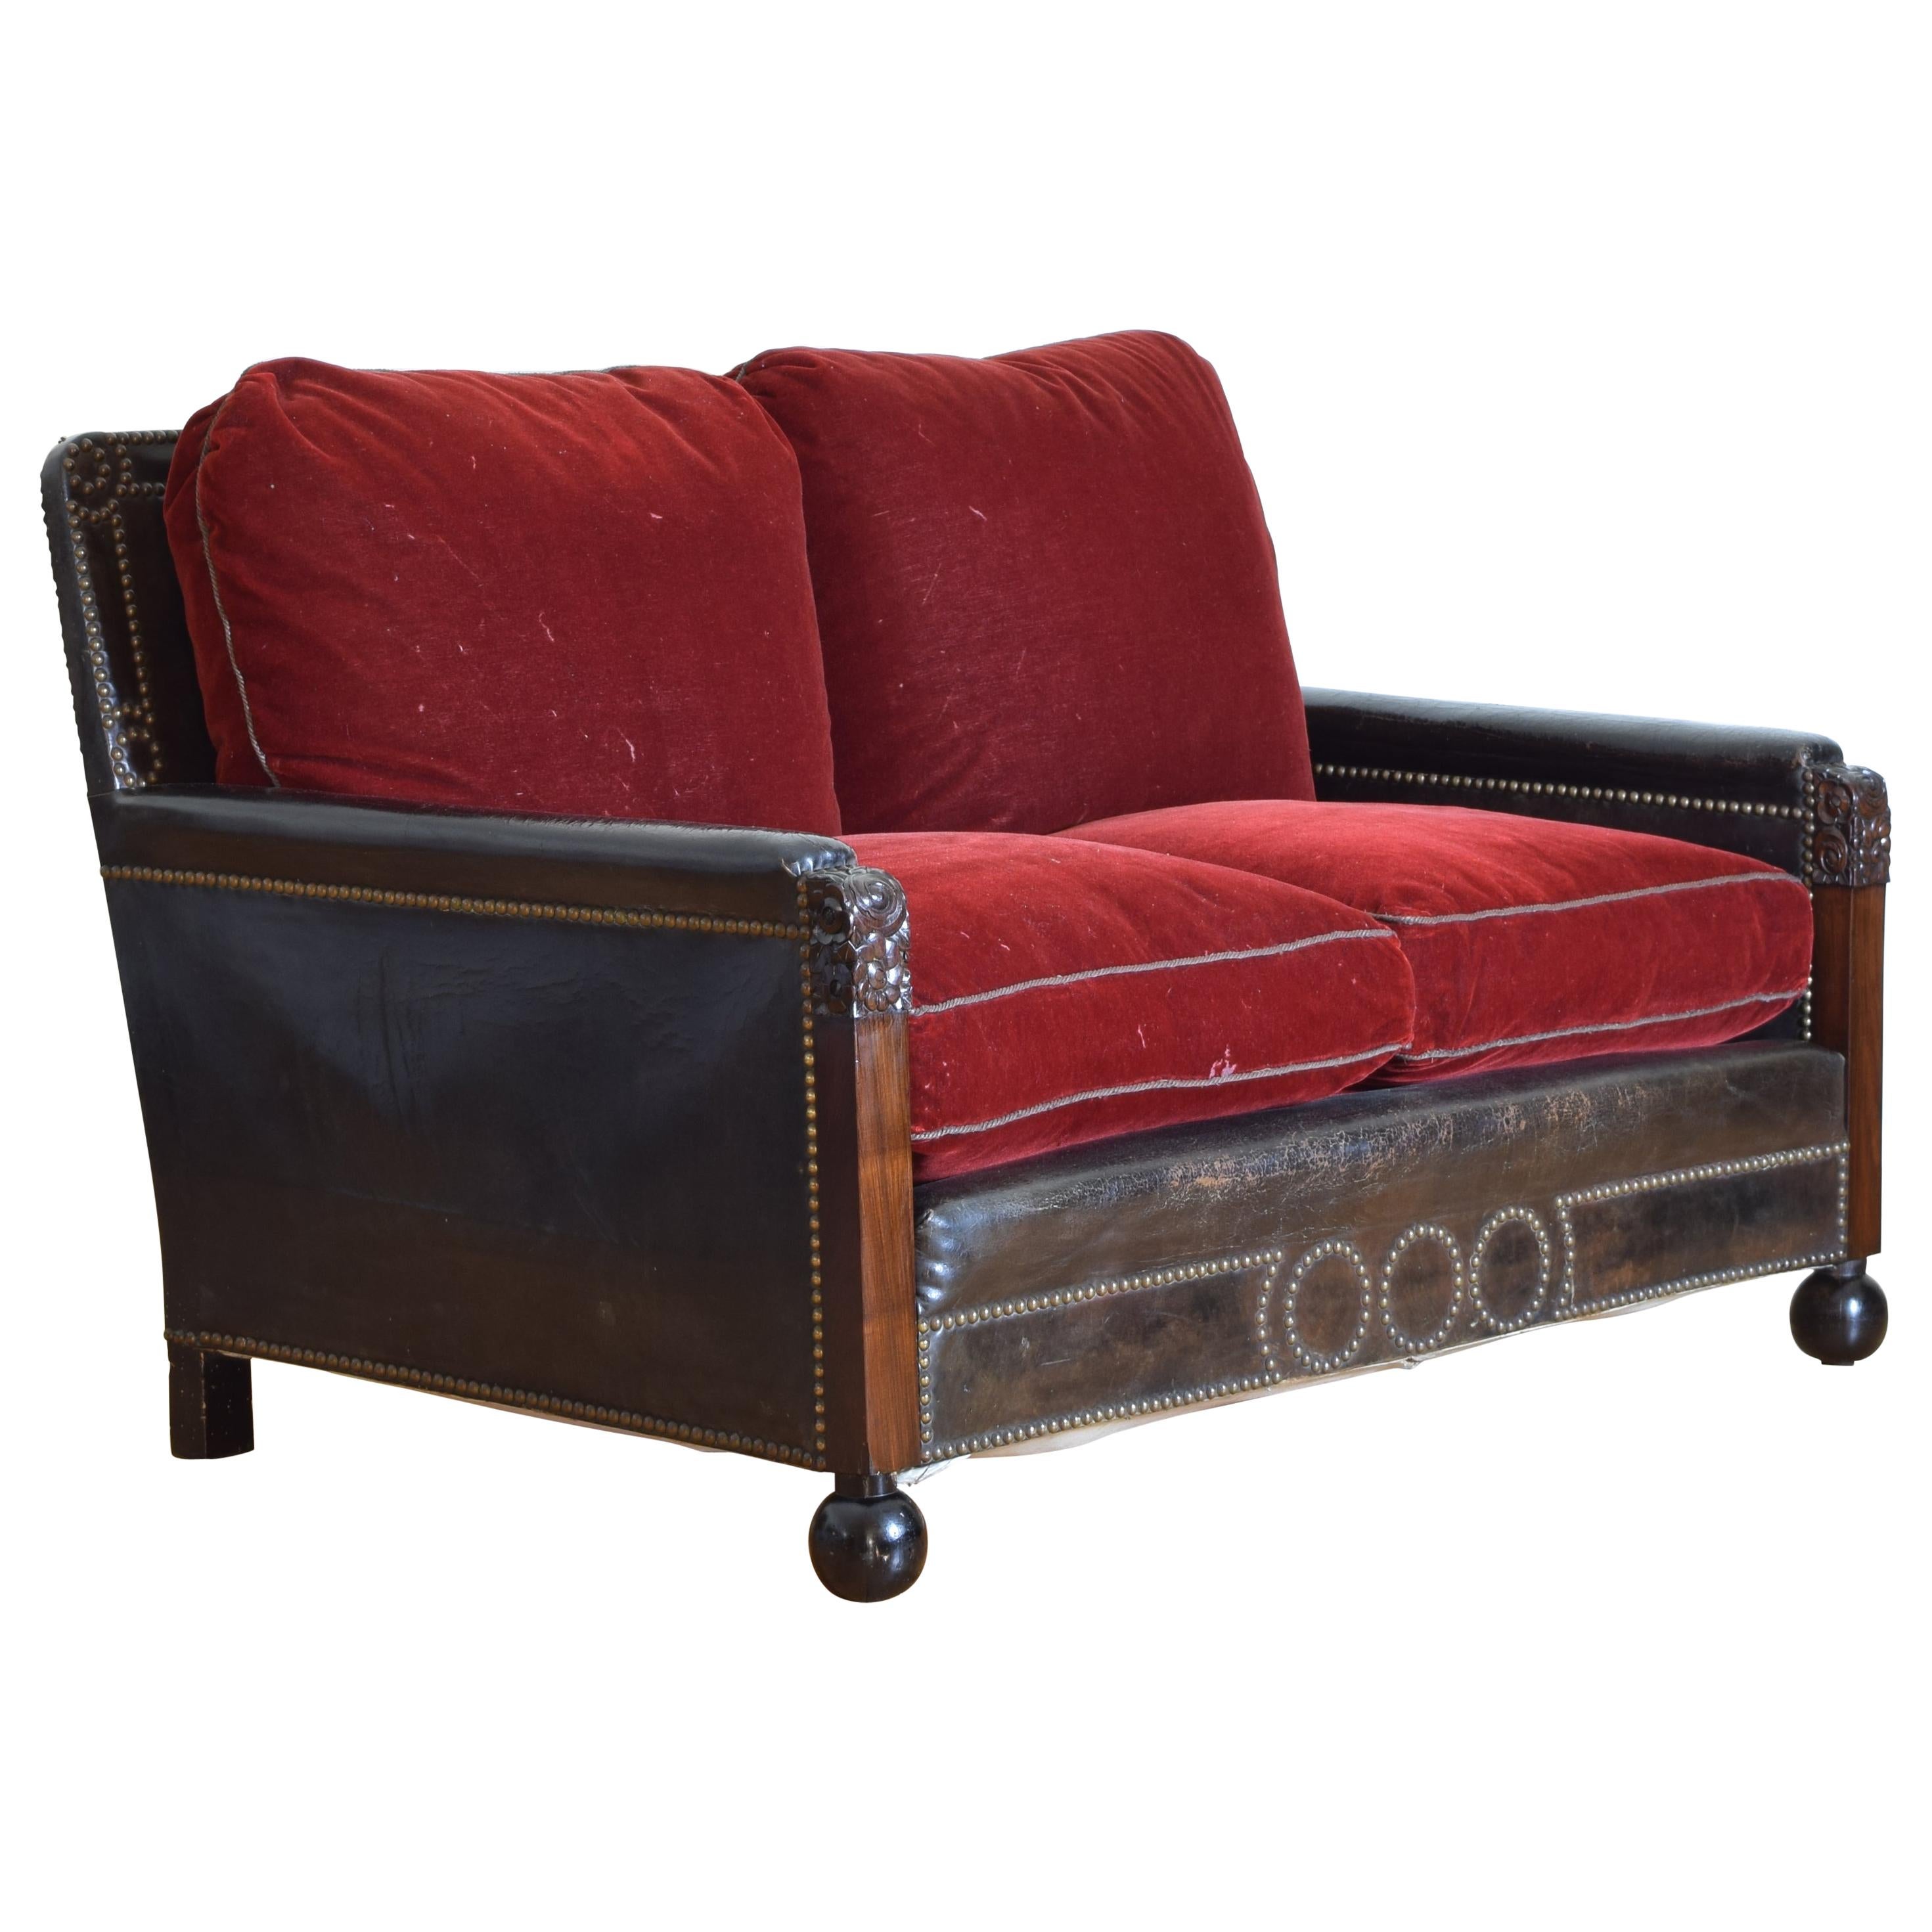 Spanish Art Deco Period Mahogany and Leather Upholstered Settee